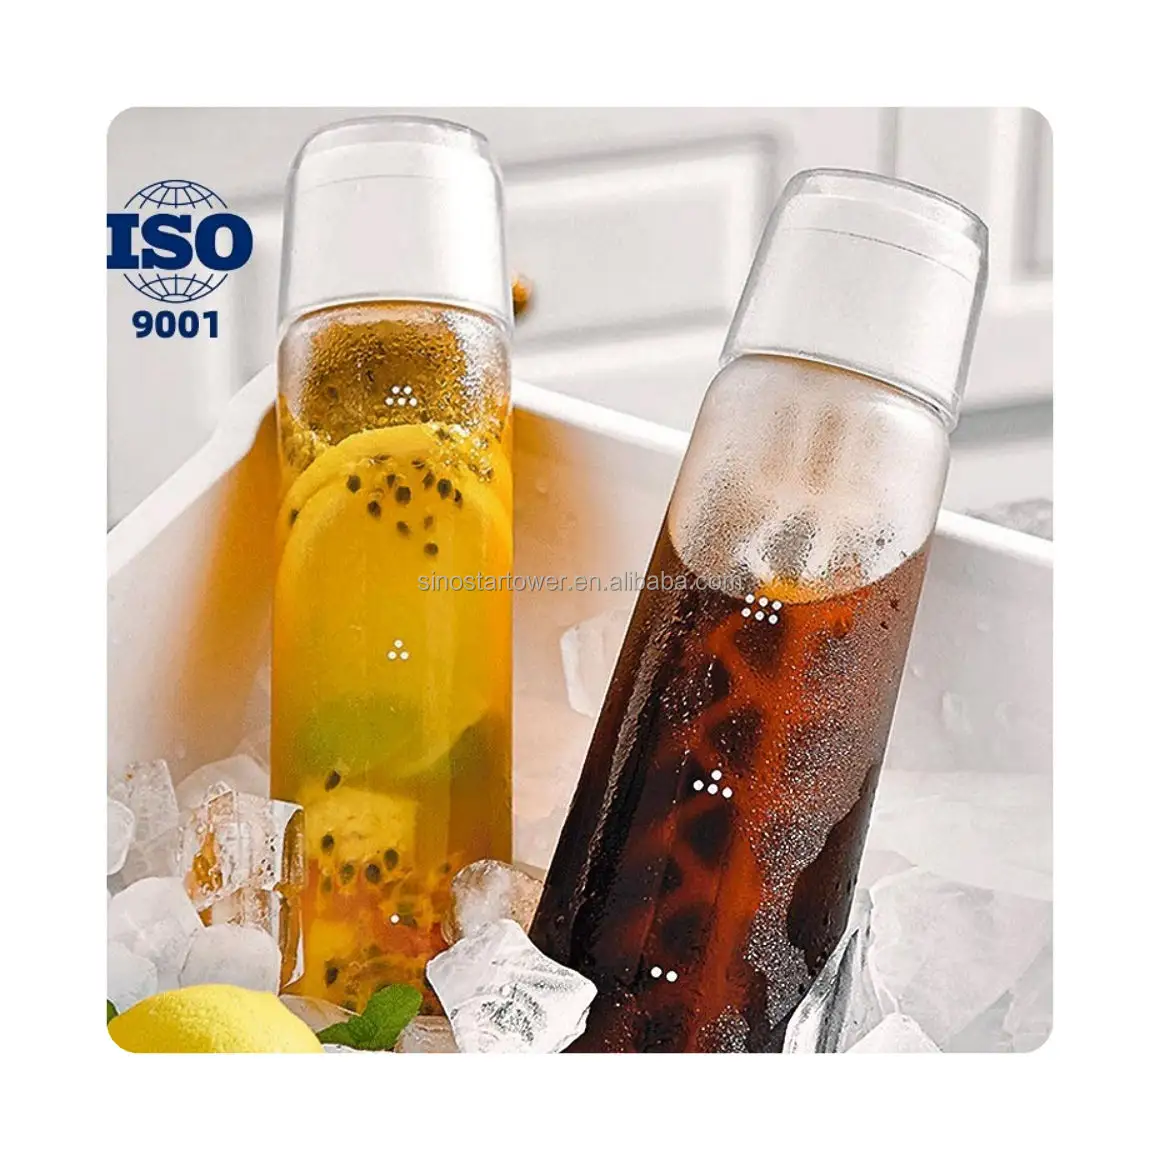 2 in 1 Cold Brew Coffee Maker Iced Coffee and Tea Bottle, Durable Glass Dispenser, Food Grade PP Filter